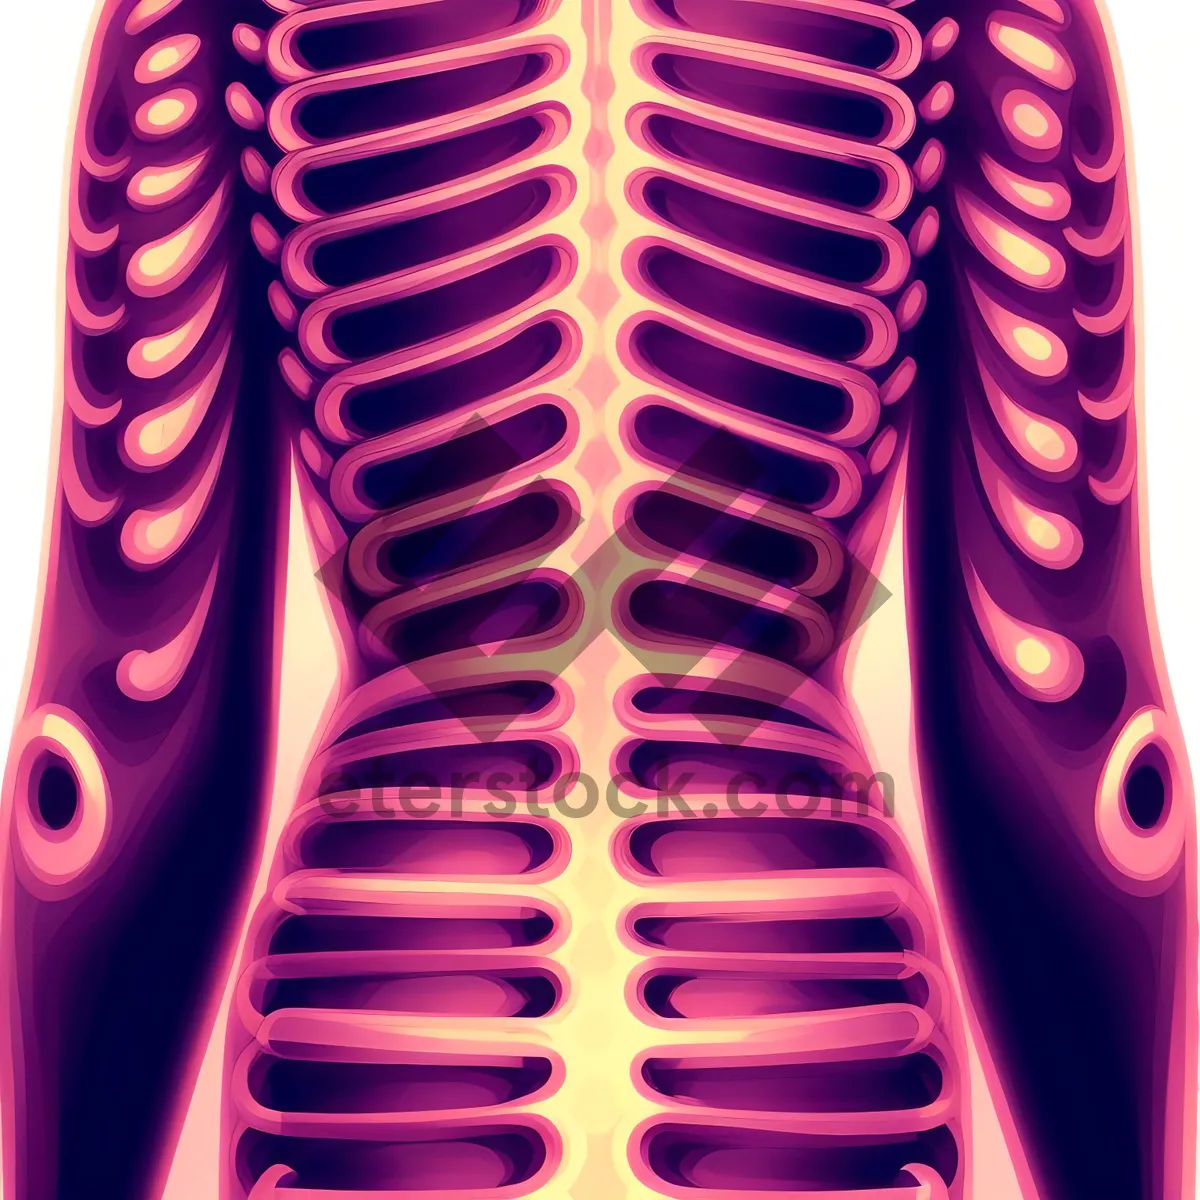 Picture of Human Anatomy: 3D X-ray of Spine